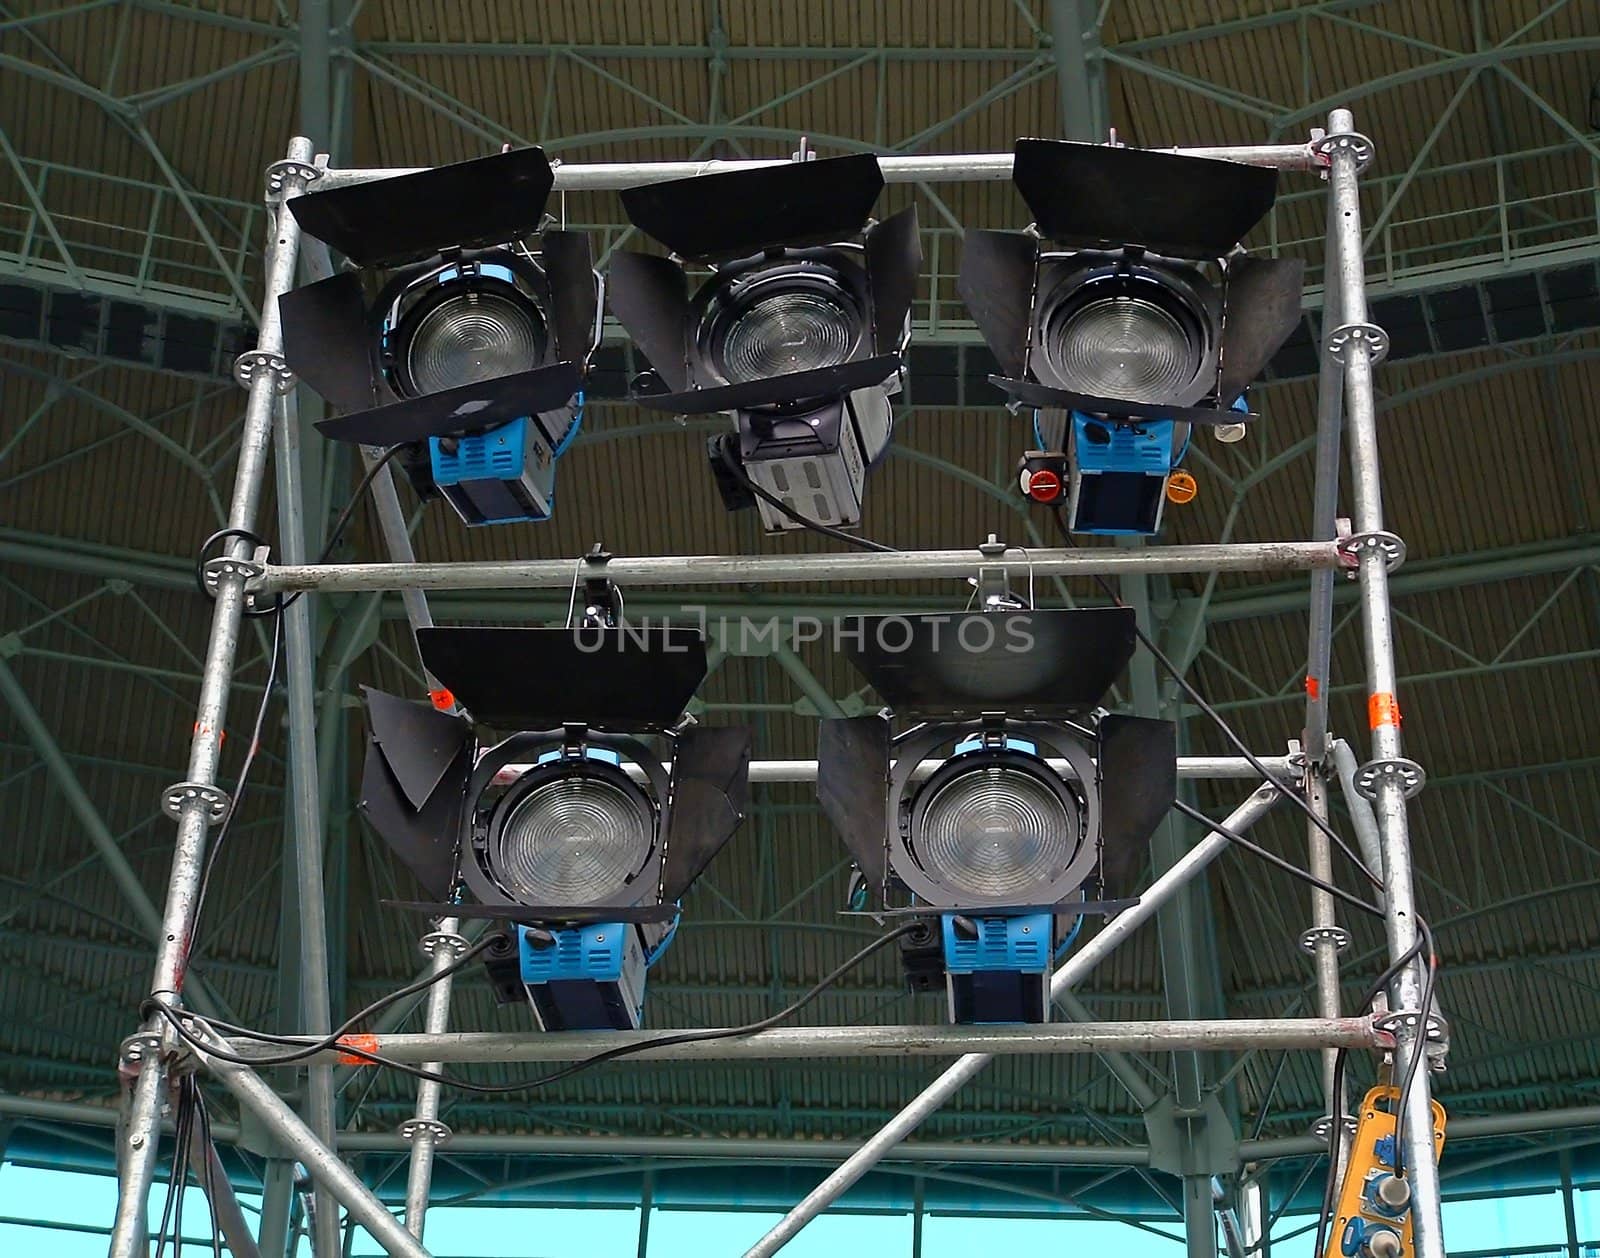 The light rack from five lanterns ready for work under a roof of arena